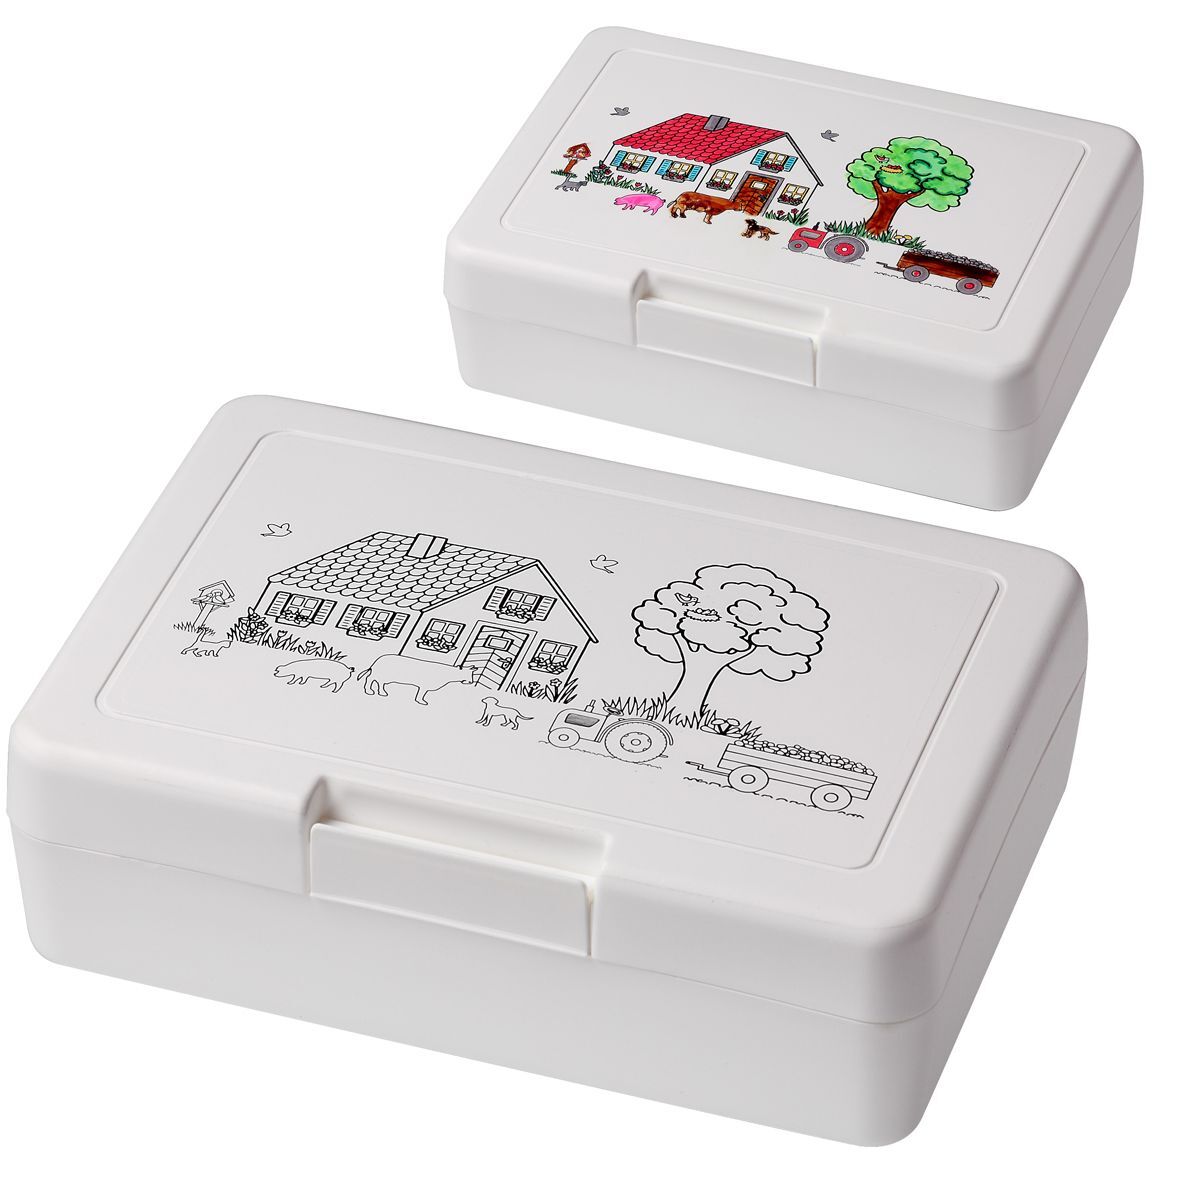 Lunch Box & Cup for Colouring